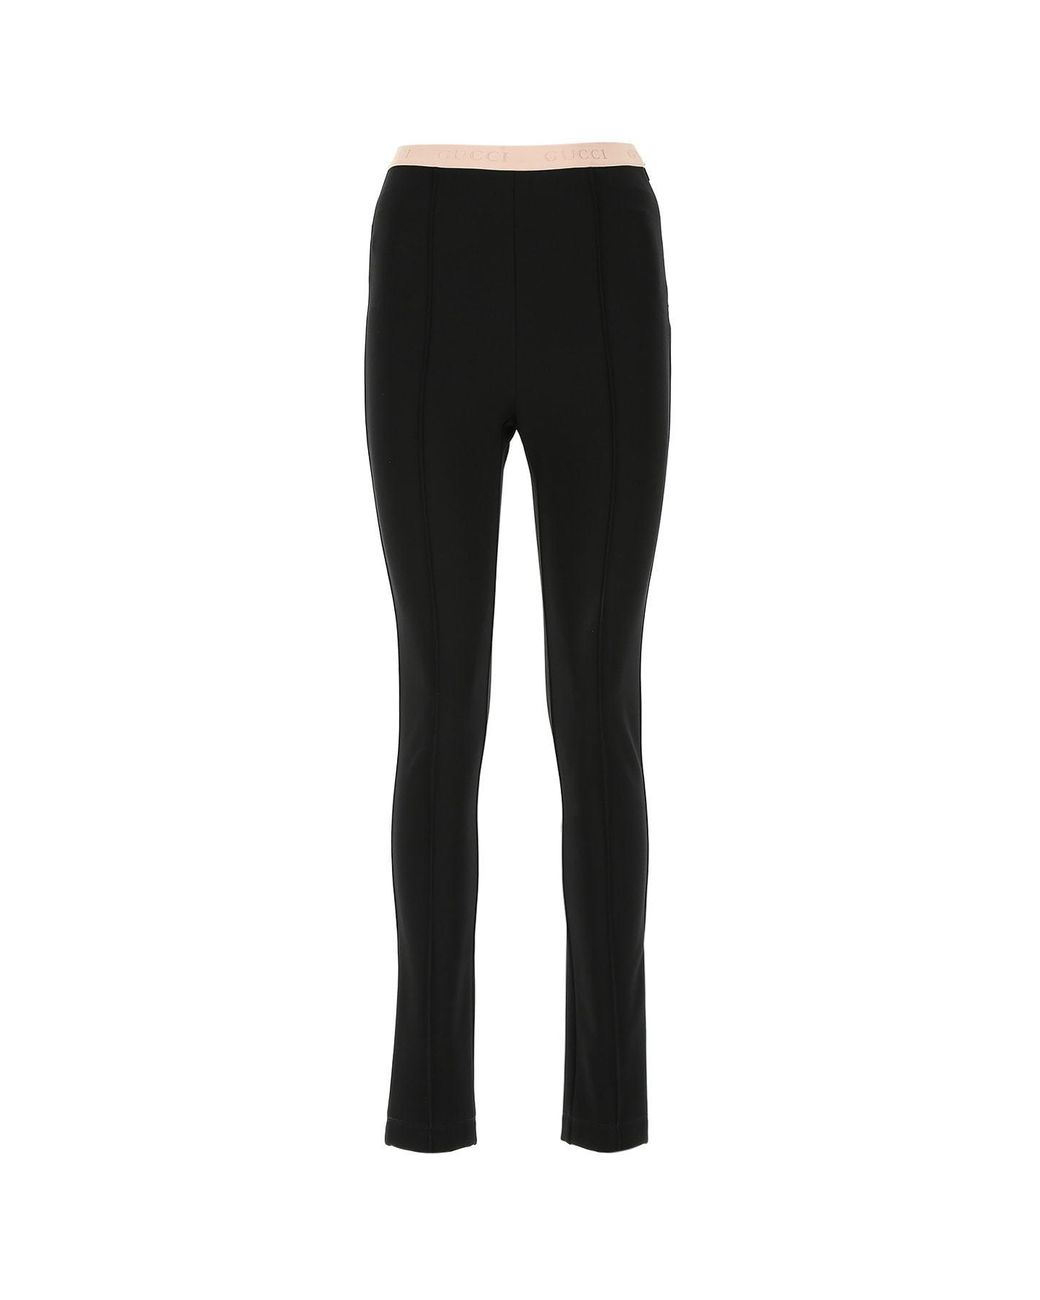 Gucci Synthetic Logo Elasticated Waistband Leggings in Black - Lyst